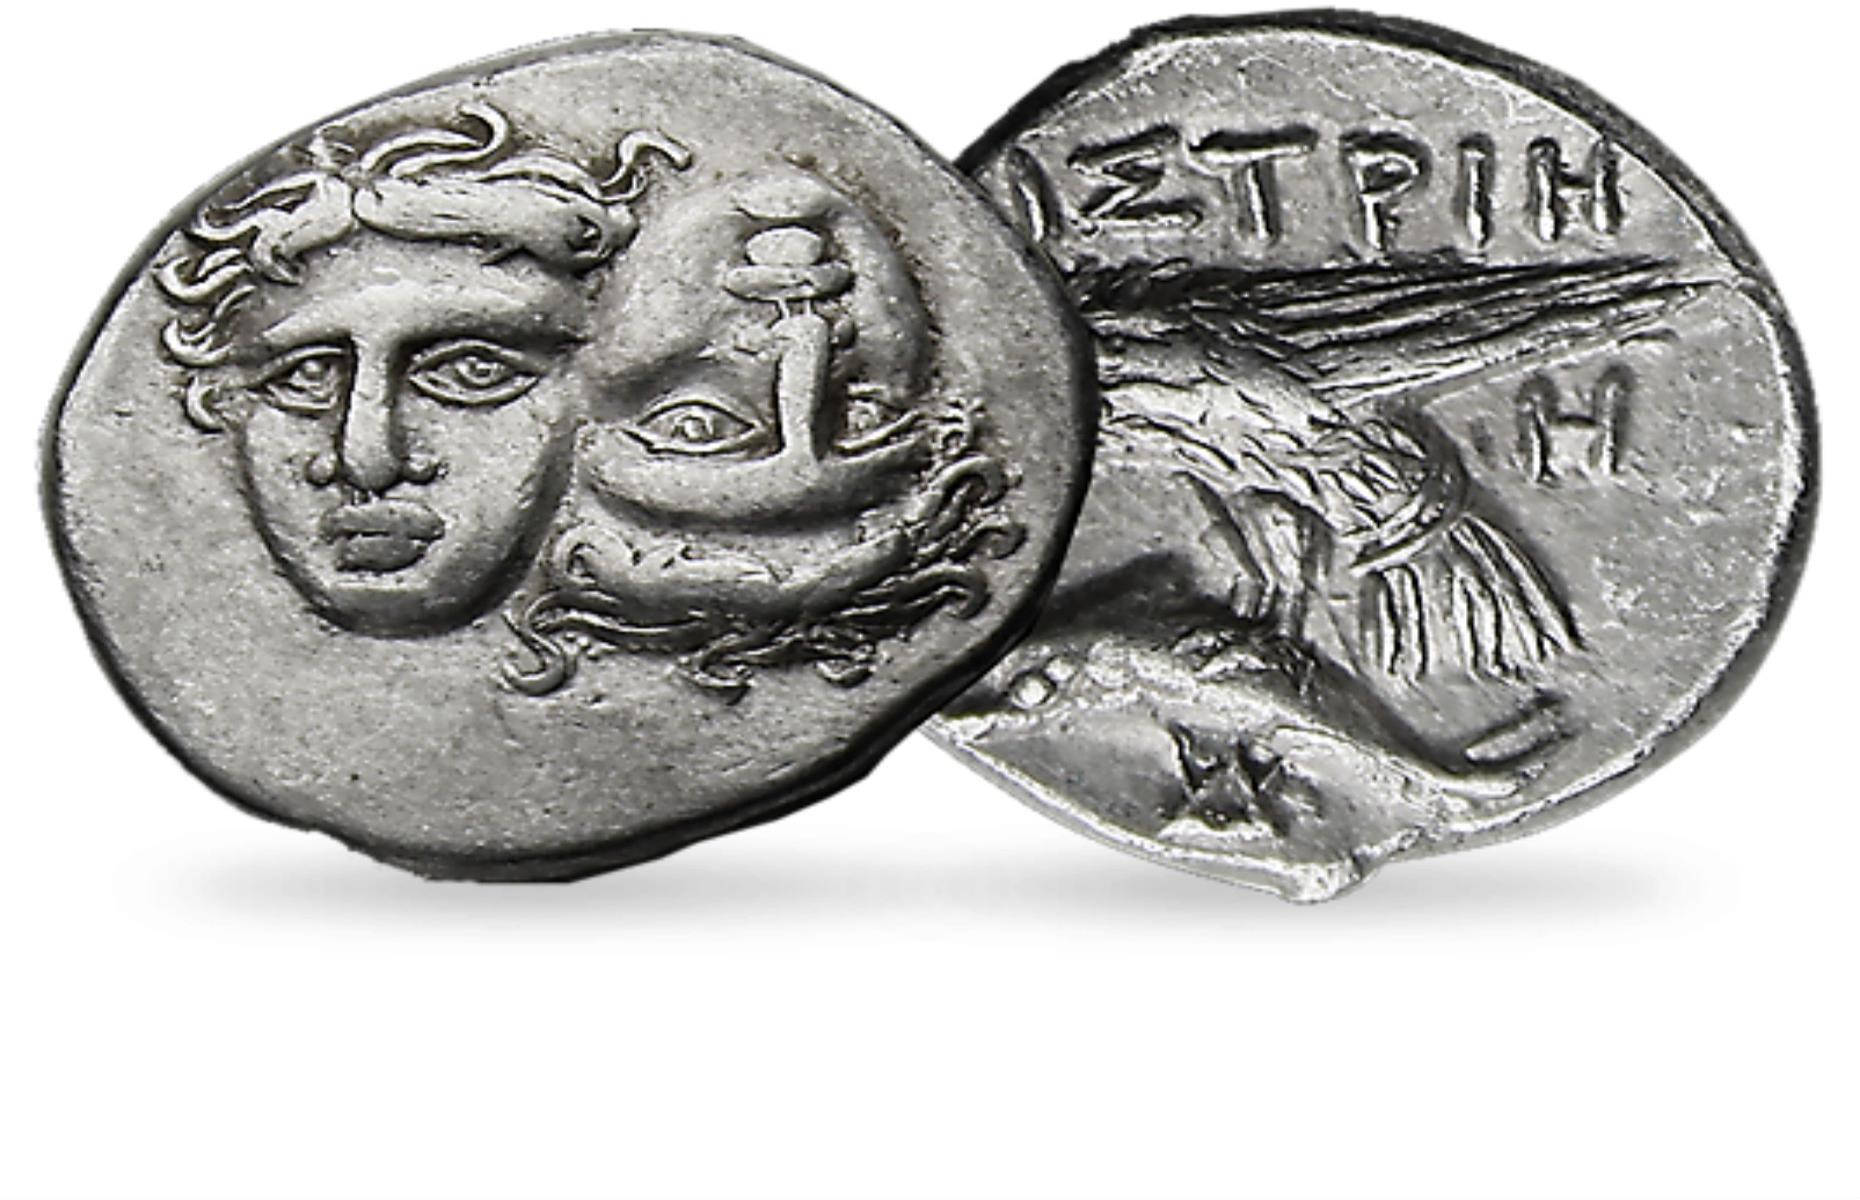 Castor and Pollux Antique Silver Coin - worth £649